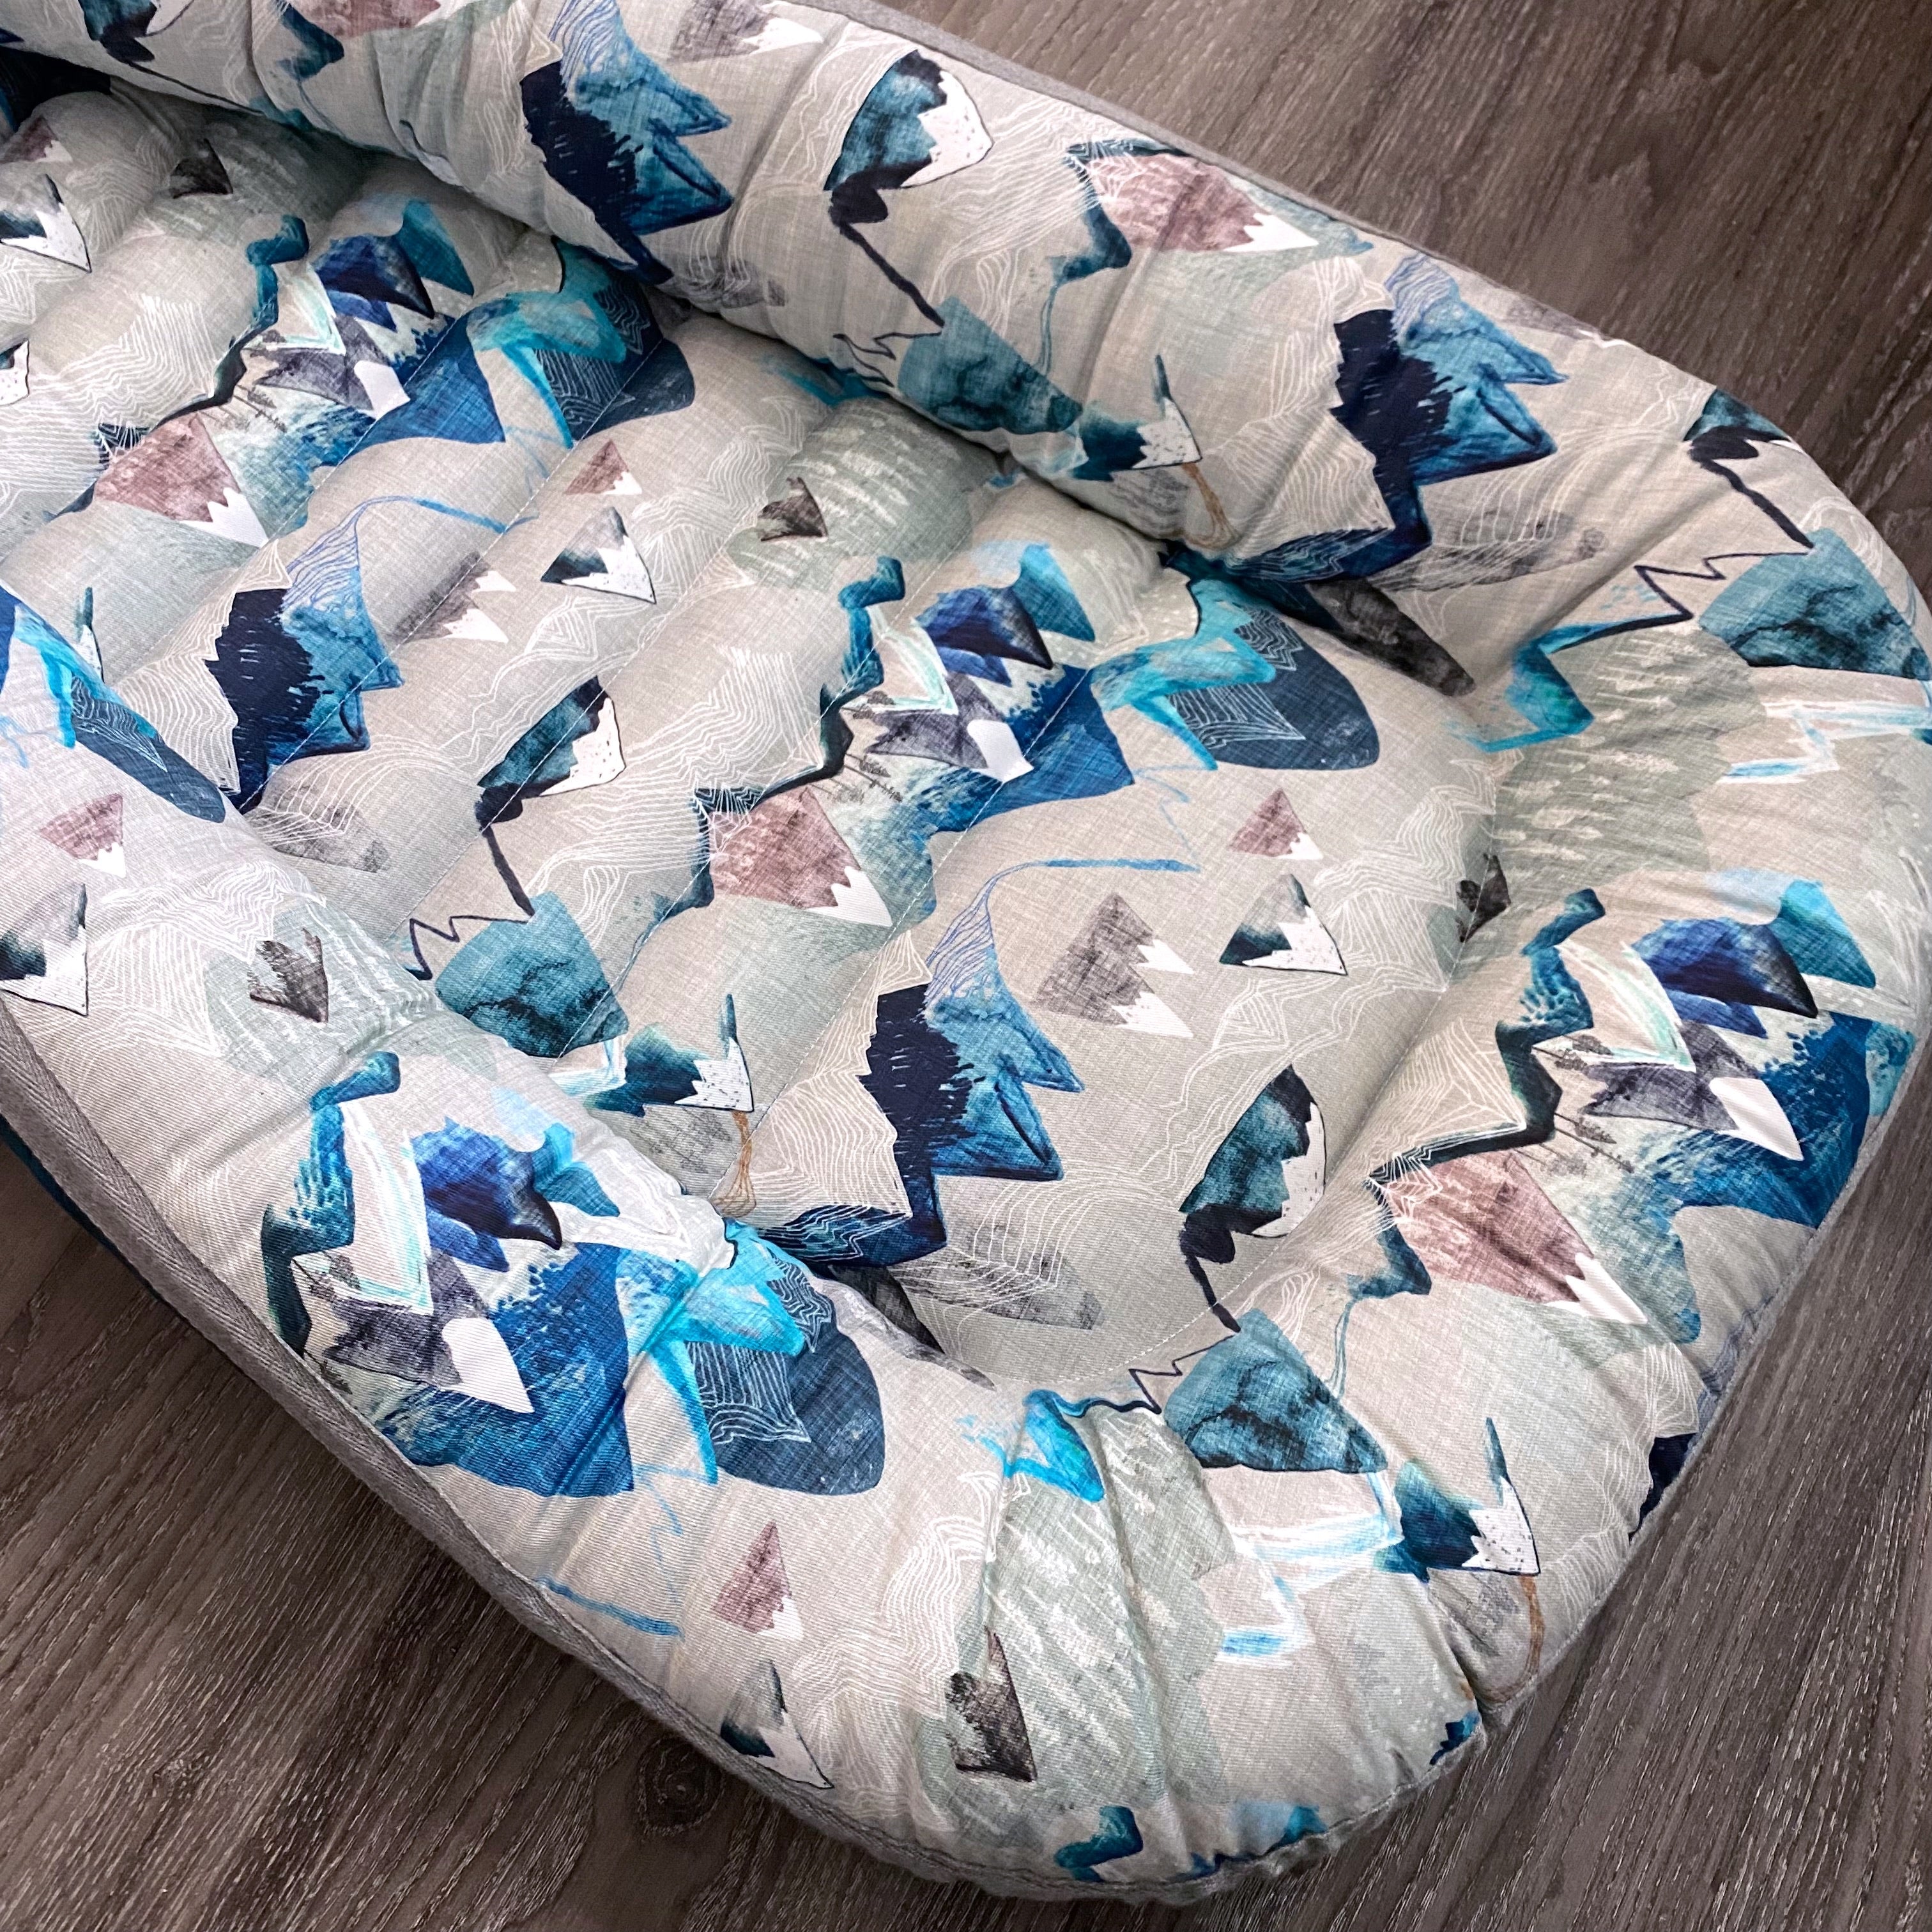 baby nest , baby lounging nest, co-sleeper, similar to dockatot and snuggle me products. This one is featured in a blue mountain design.